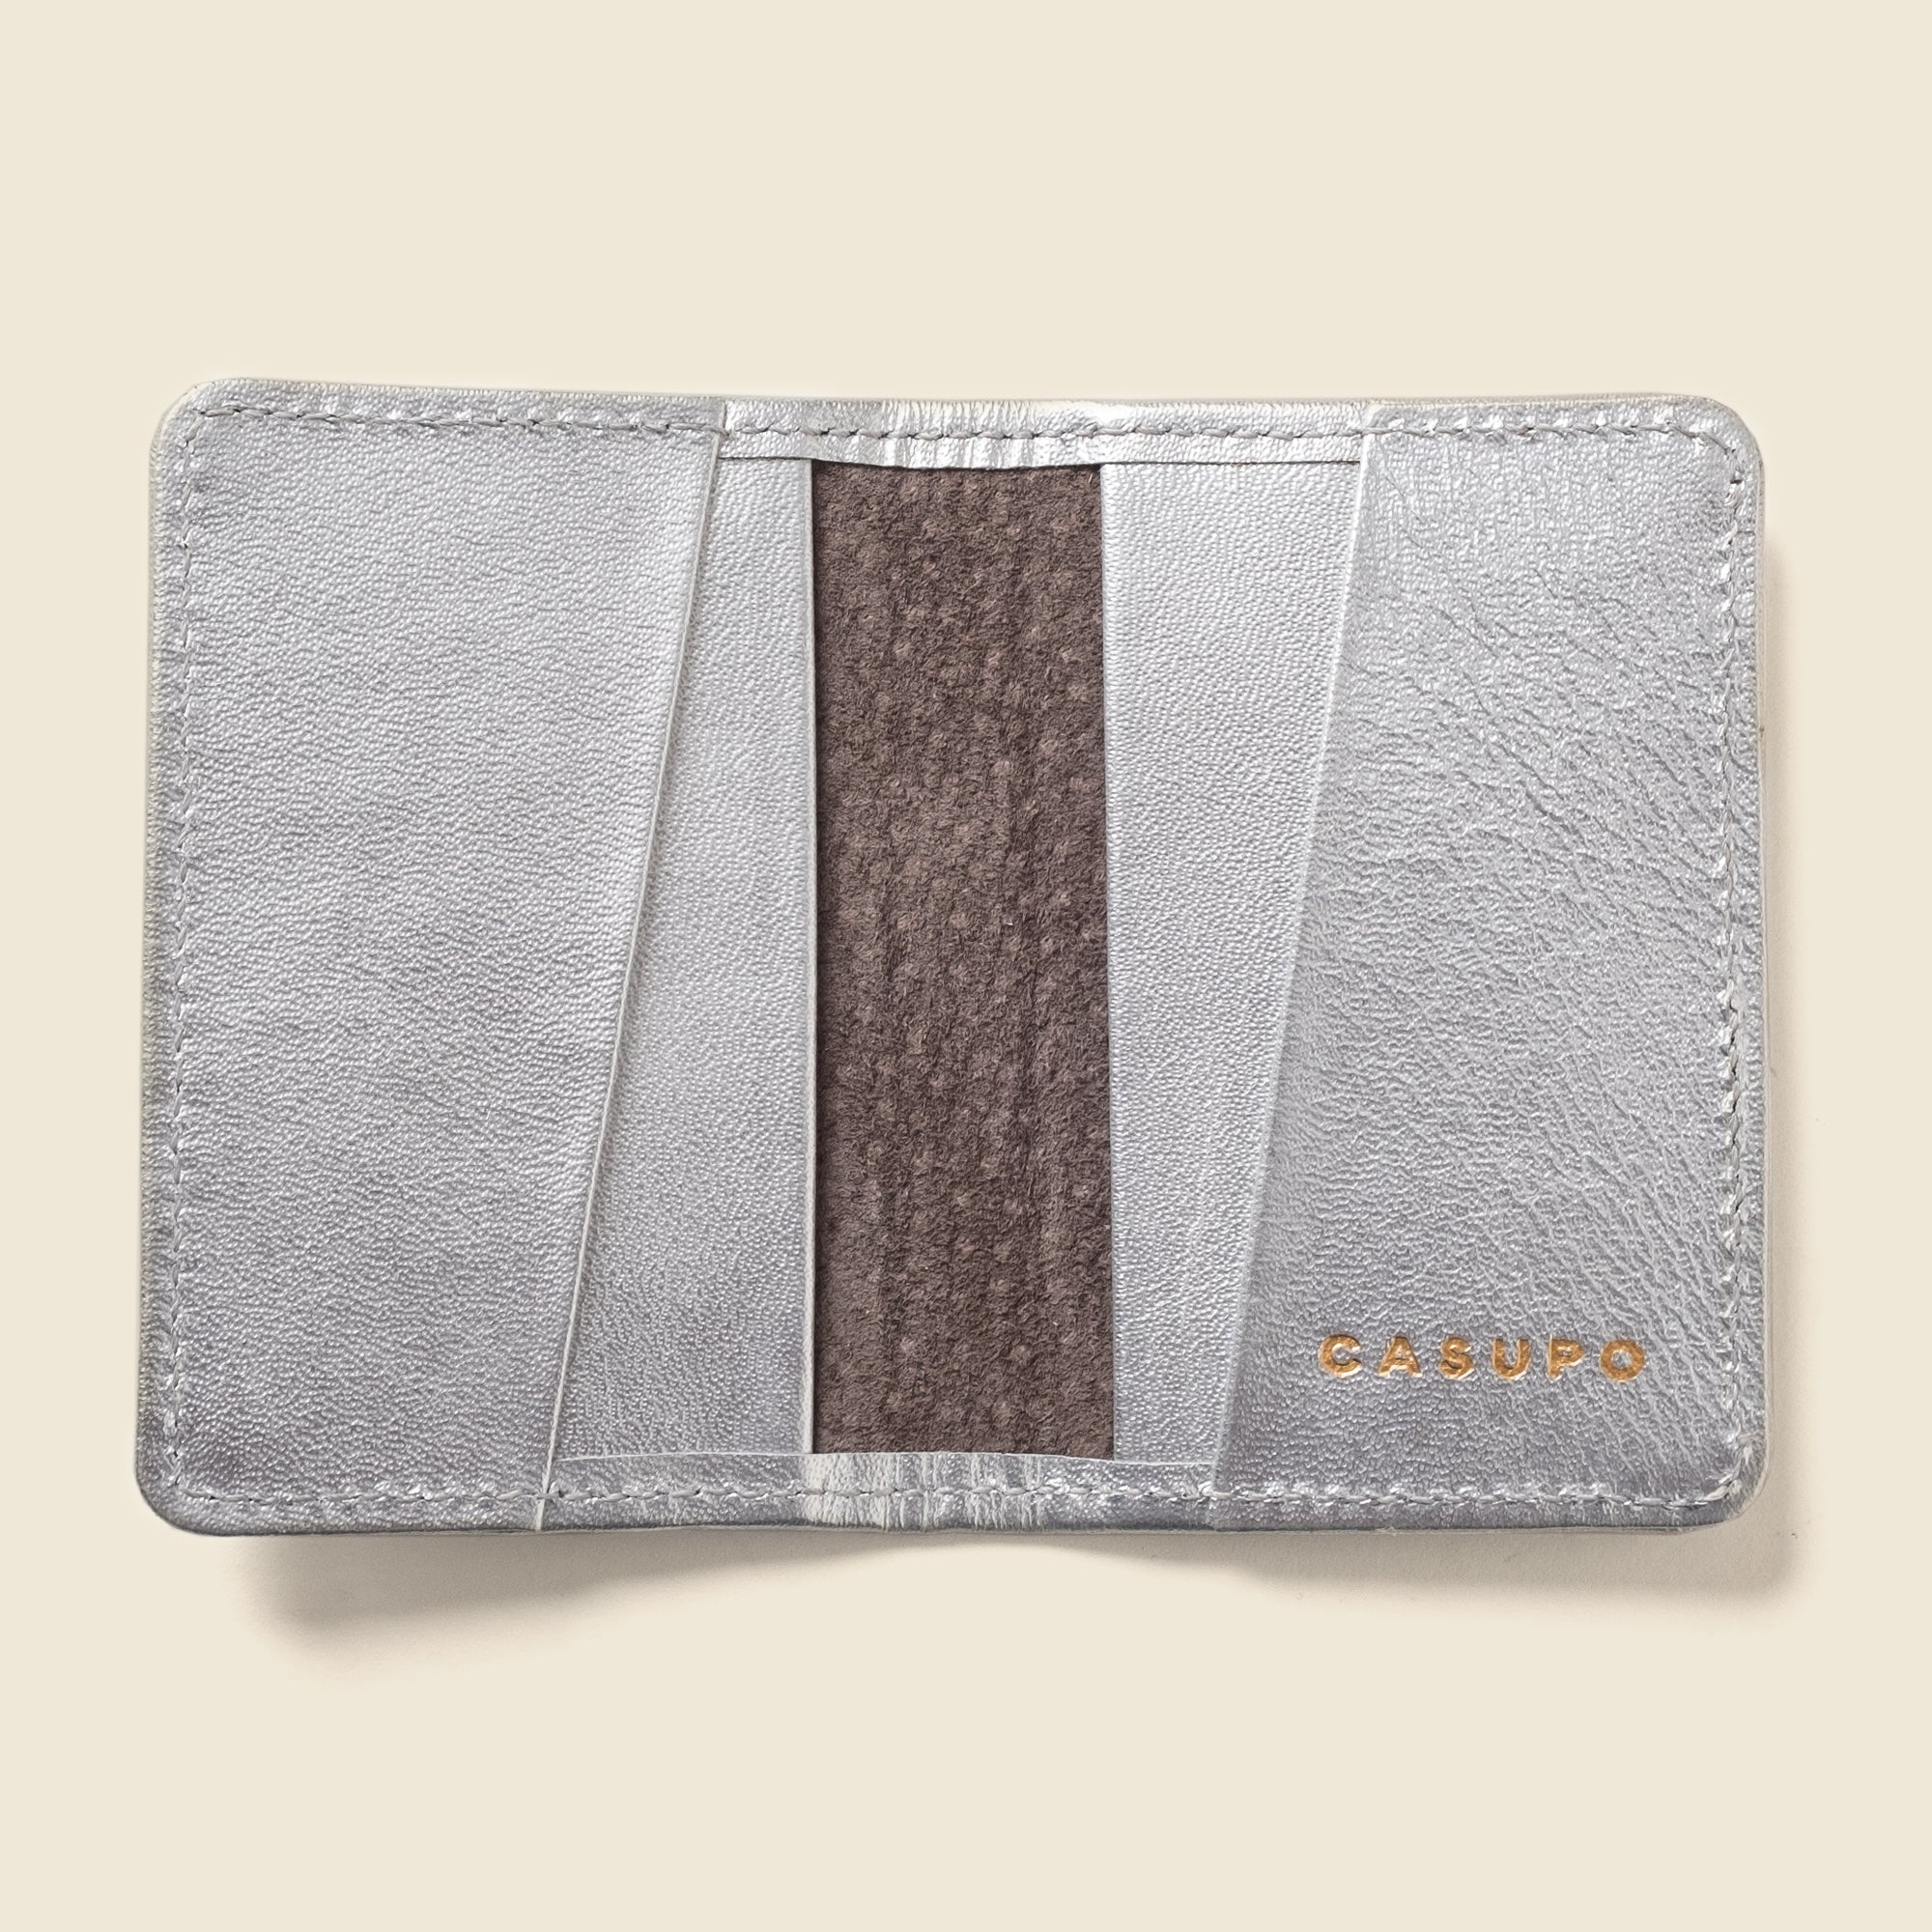 Silver leather bifold wallet from Casupo for women